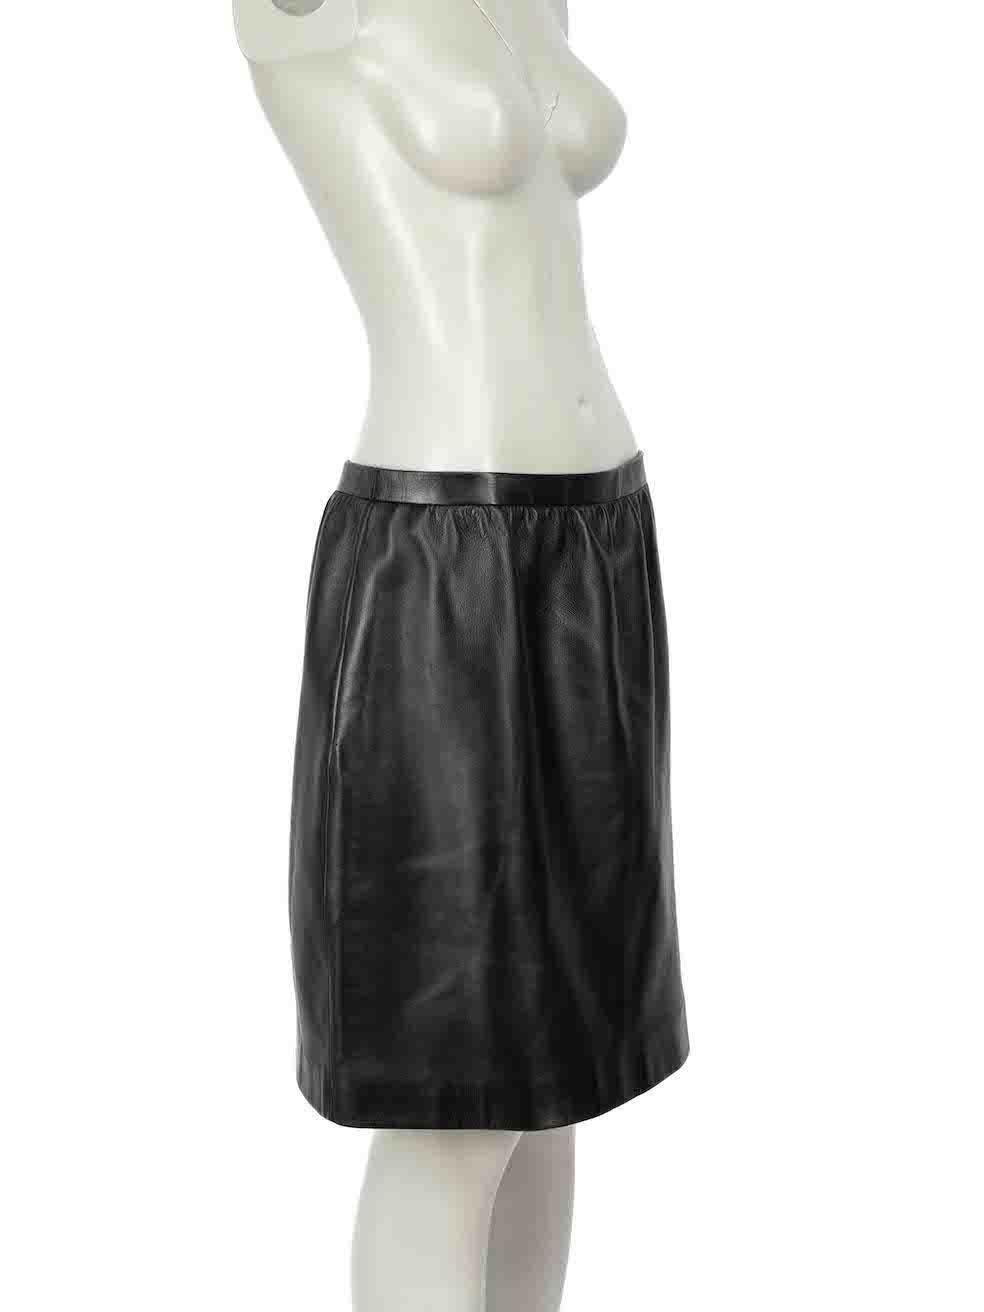 CONDITION is Very good. Minimal wear to skirt is evident. Minimal loose stitch to left side seam on this used Gucci designer resale item. 
 
Details
Black
Leather
Mini fitted skirt
Side zip closure with GG Button

Made in Italy
 
Composition
100%